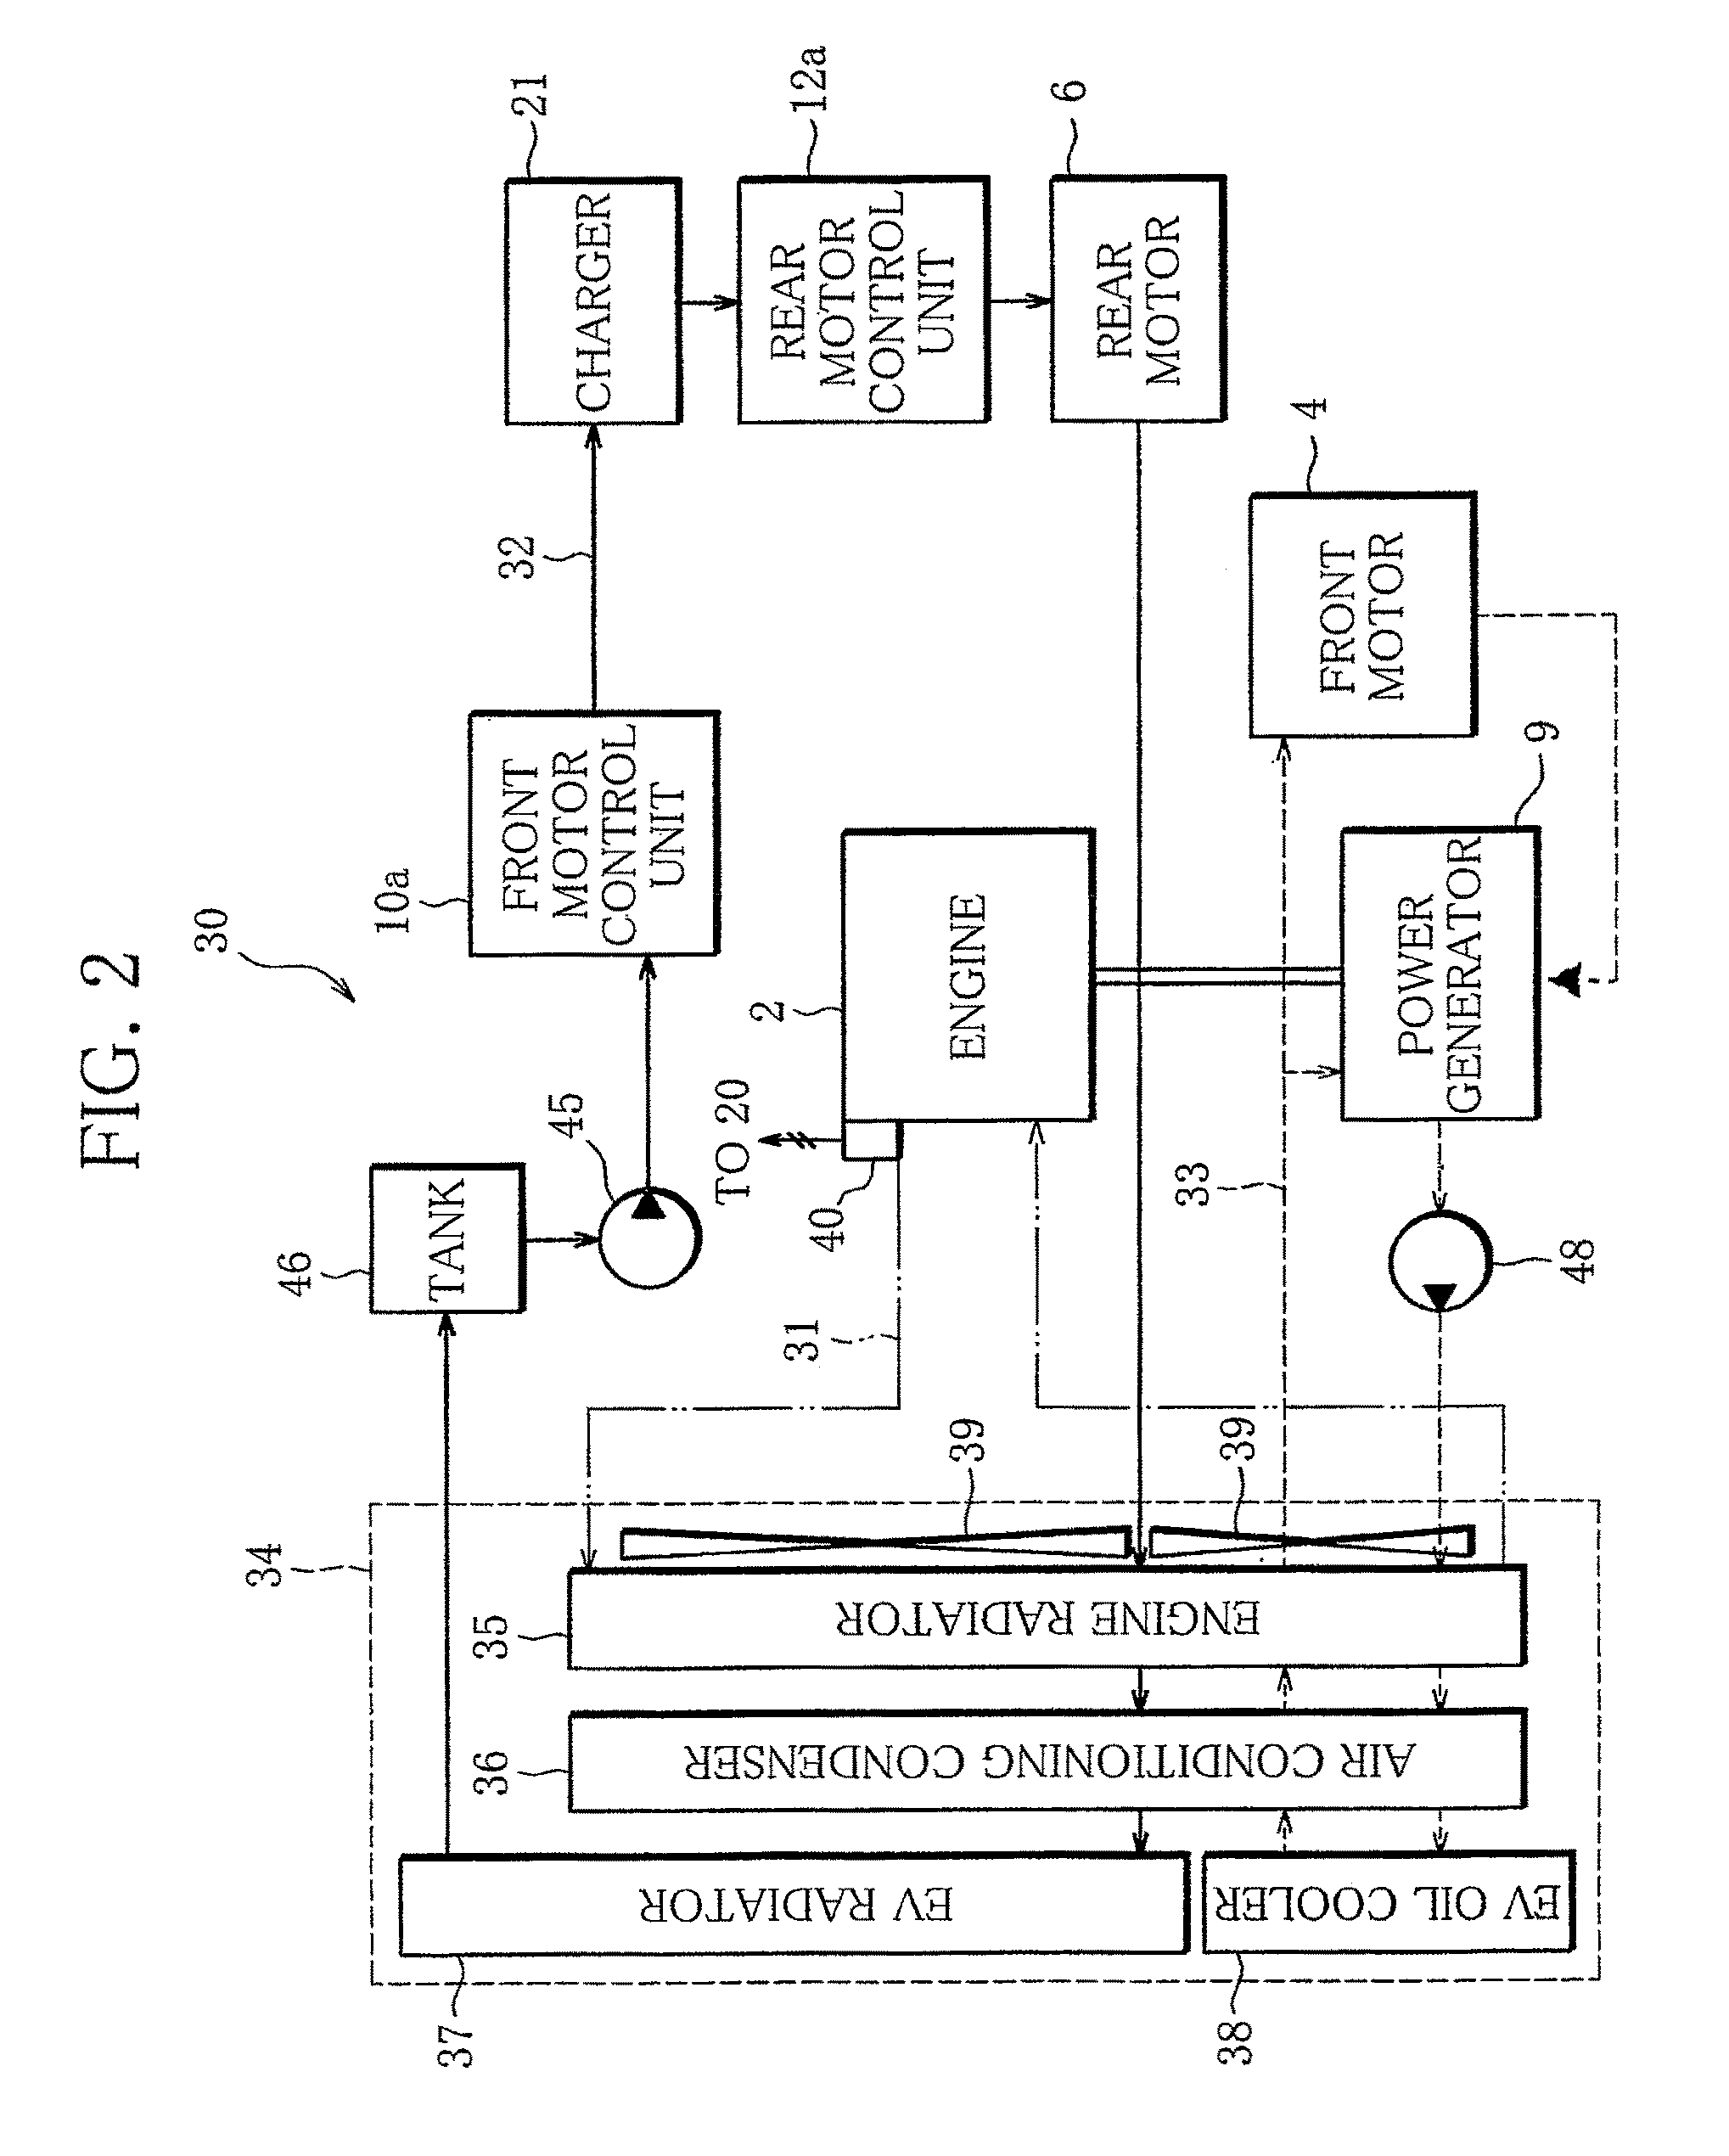 Charge control device for hybrid vehicle